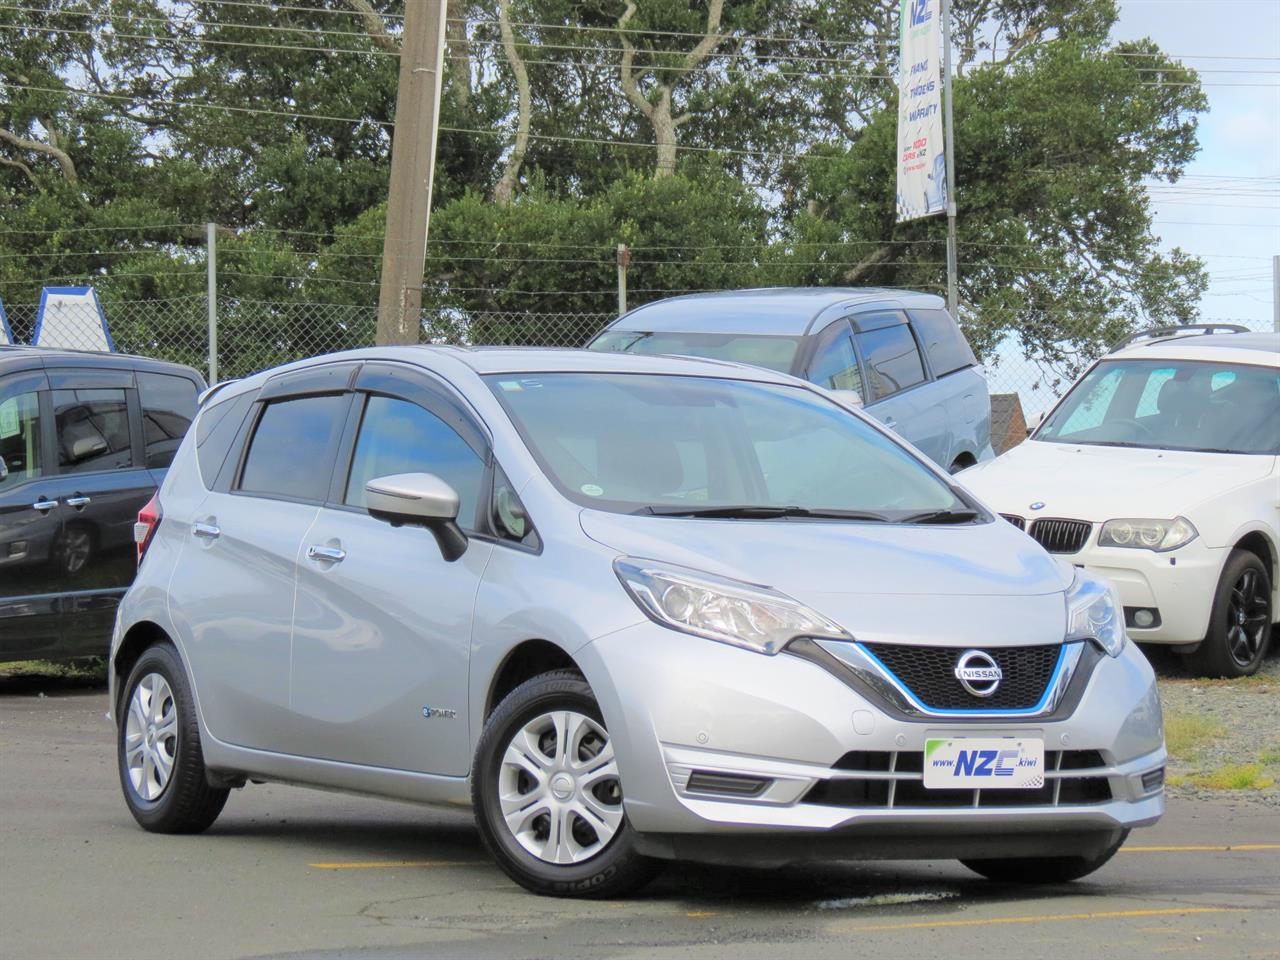 NZC 2017 Nissan NOTE just arrived to Auckland